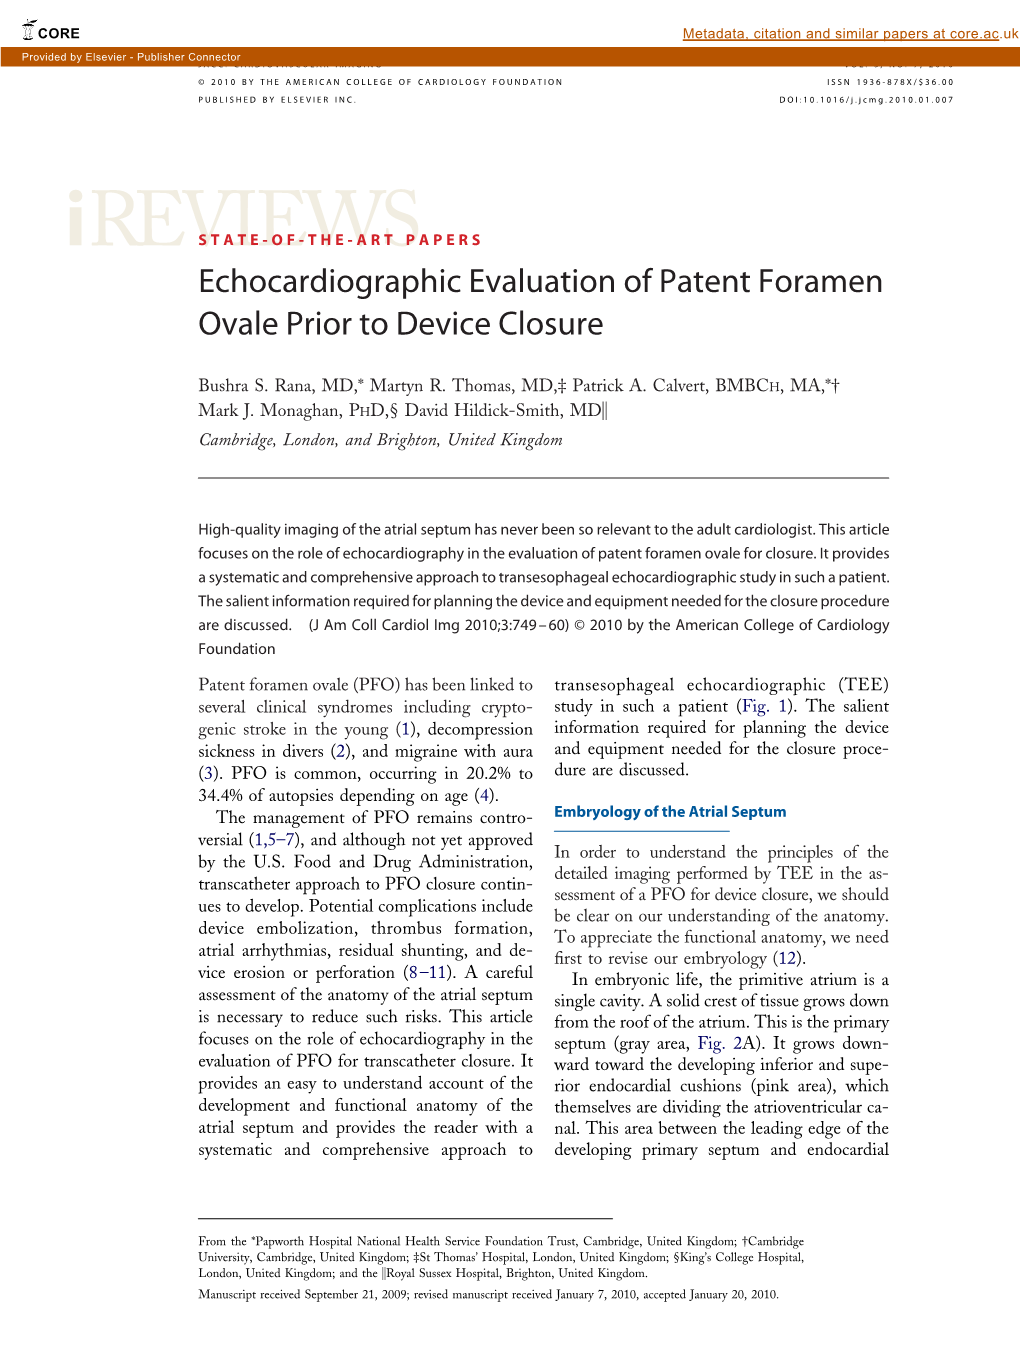 Echocardiographic Evaluation of Patent Foramen Ovale Prior to Device Closure